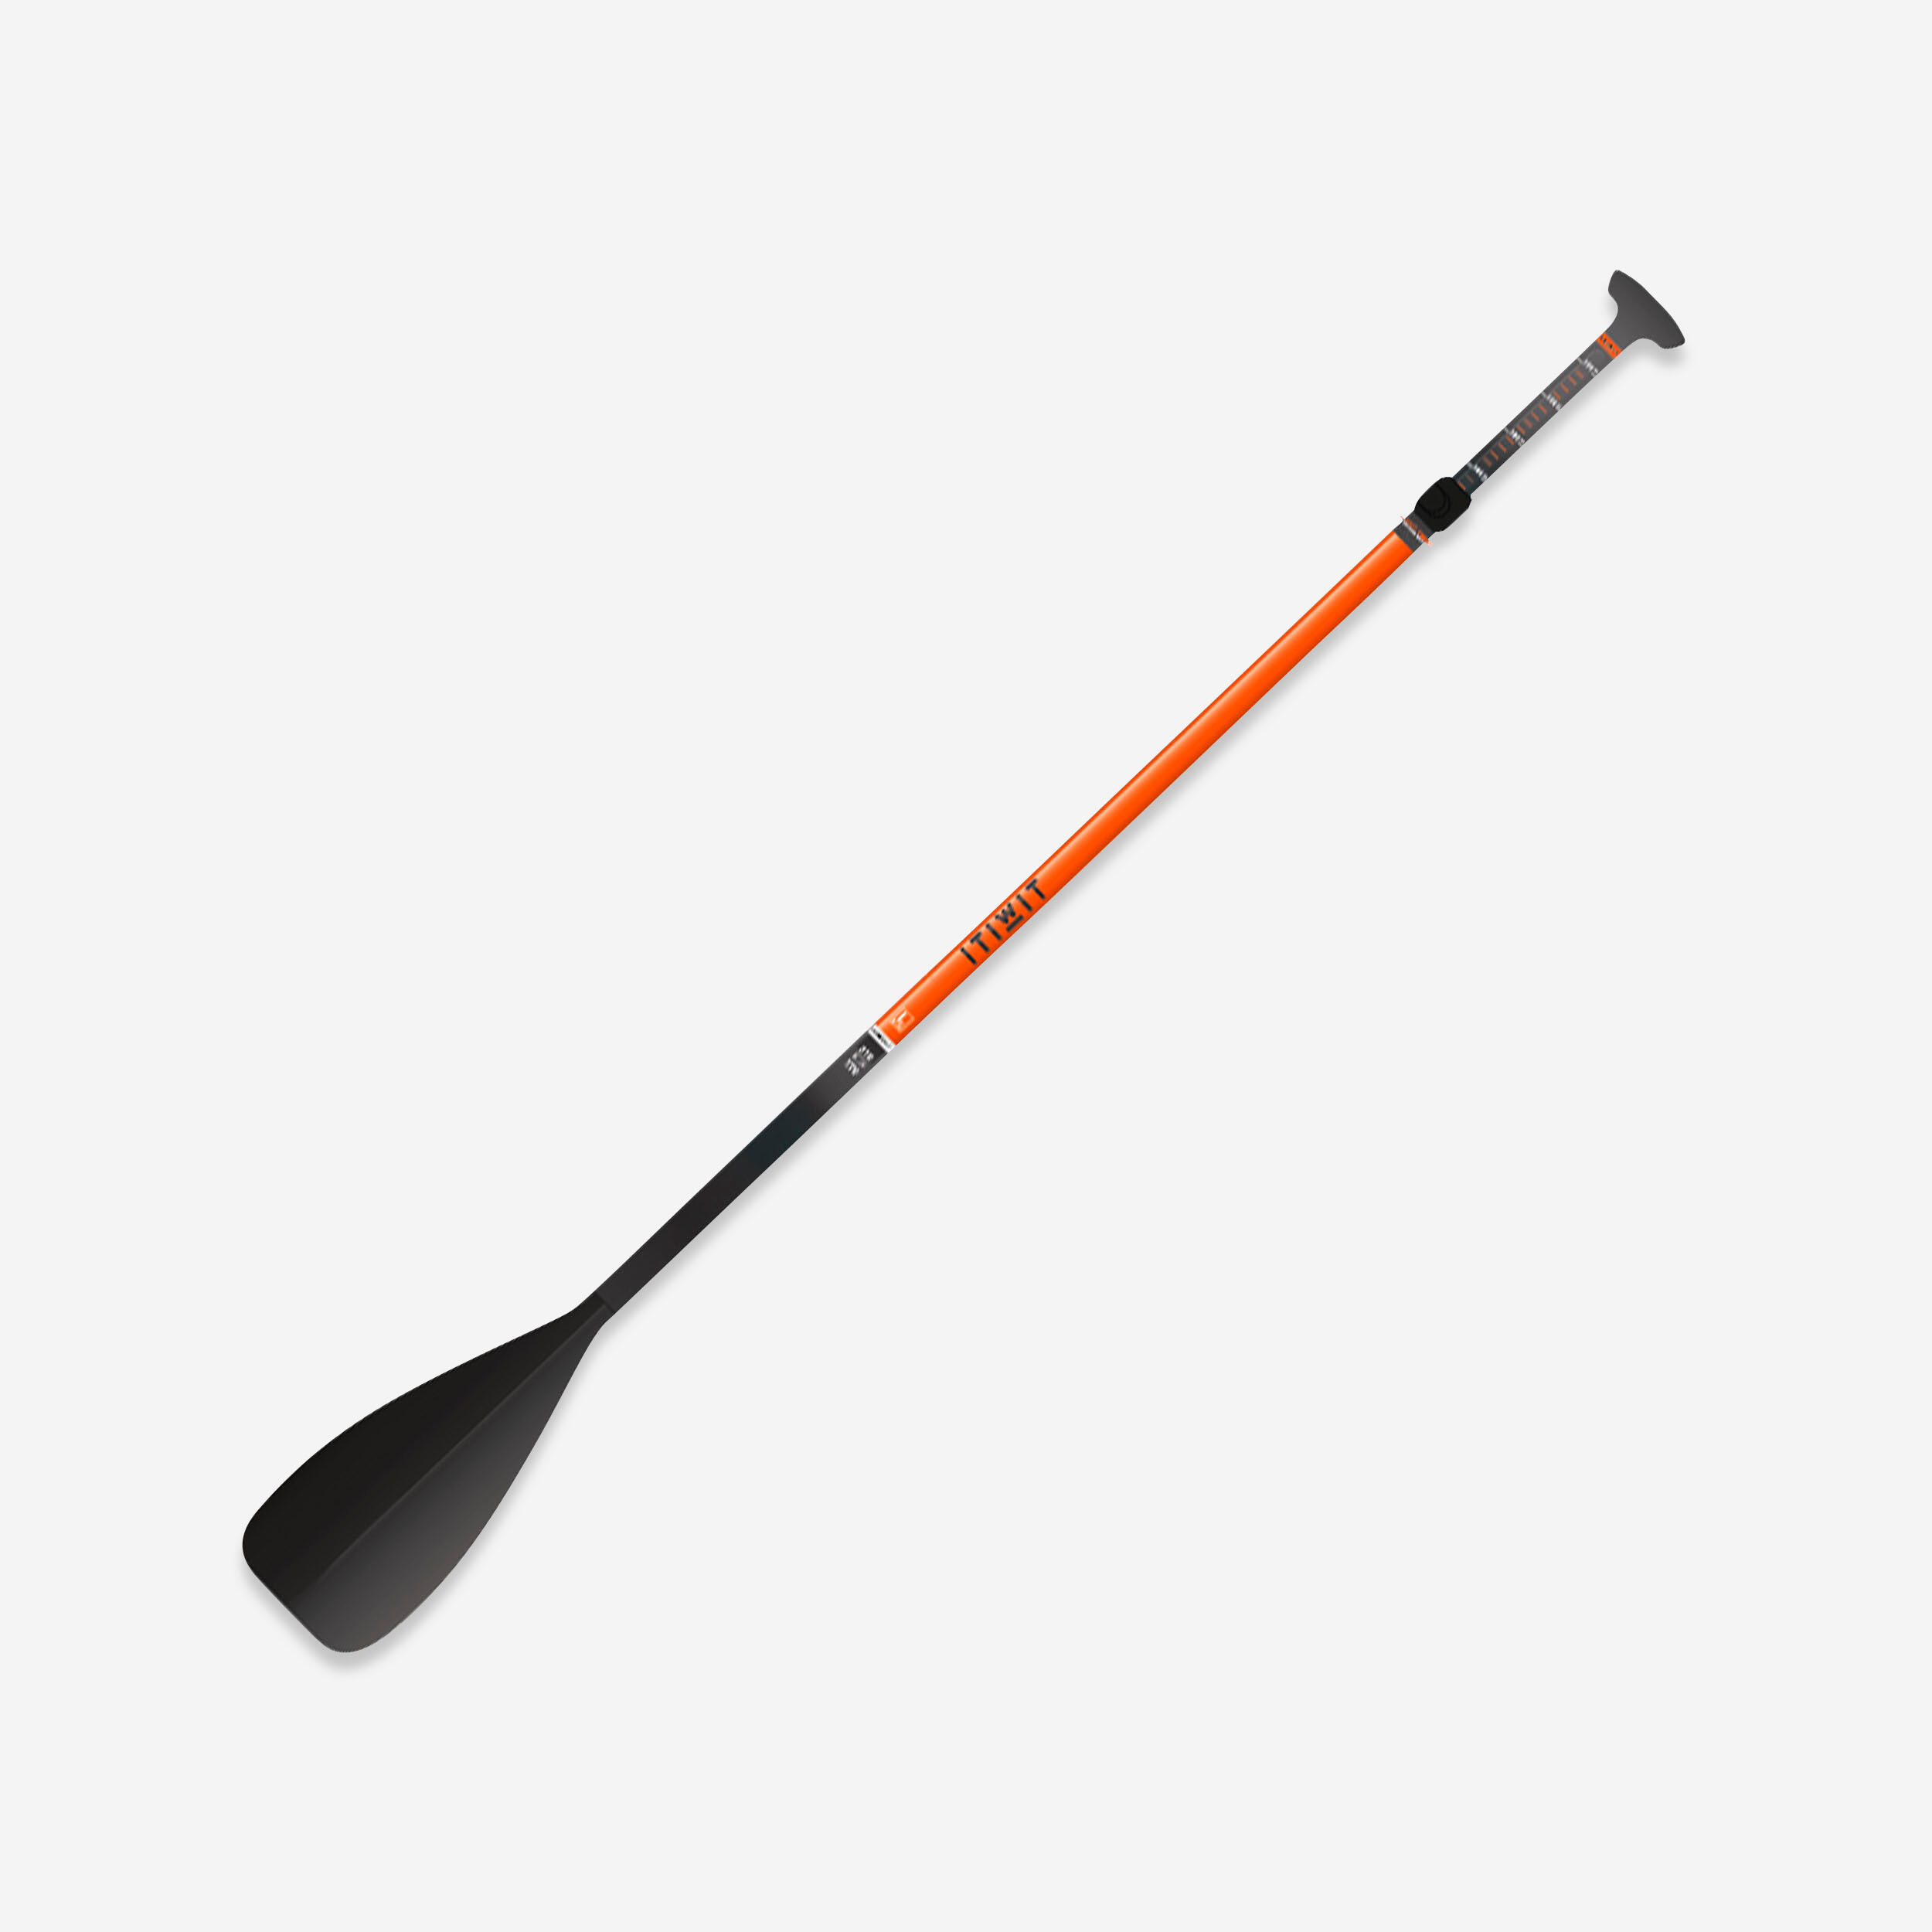 SUP paddle, adjustable (170–210 cm) mixed tube (fibre and carbon) 14/14